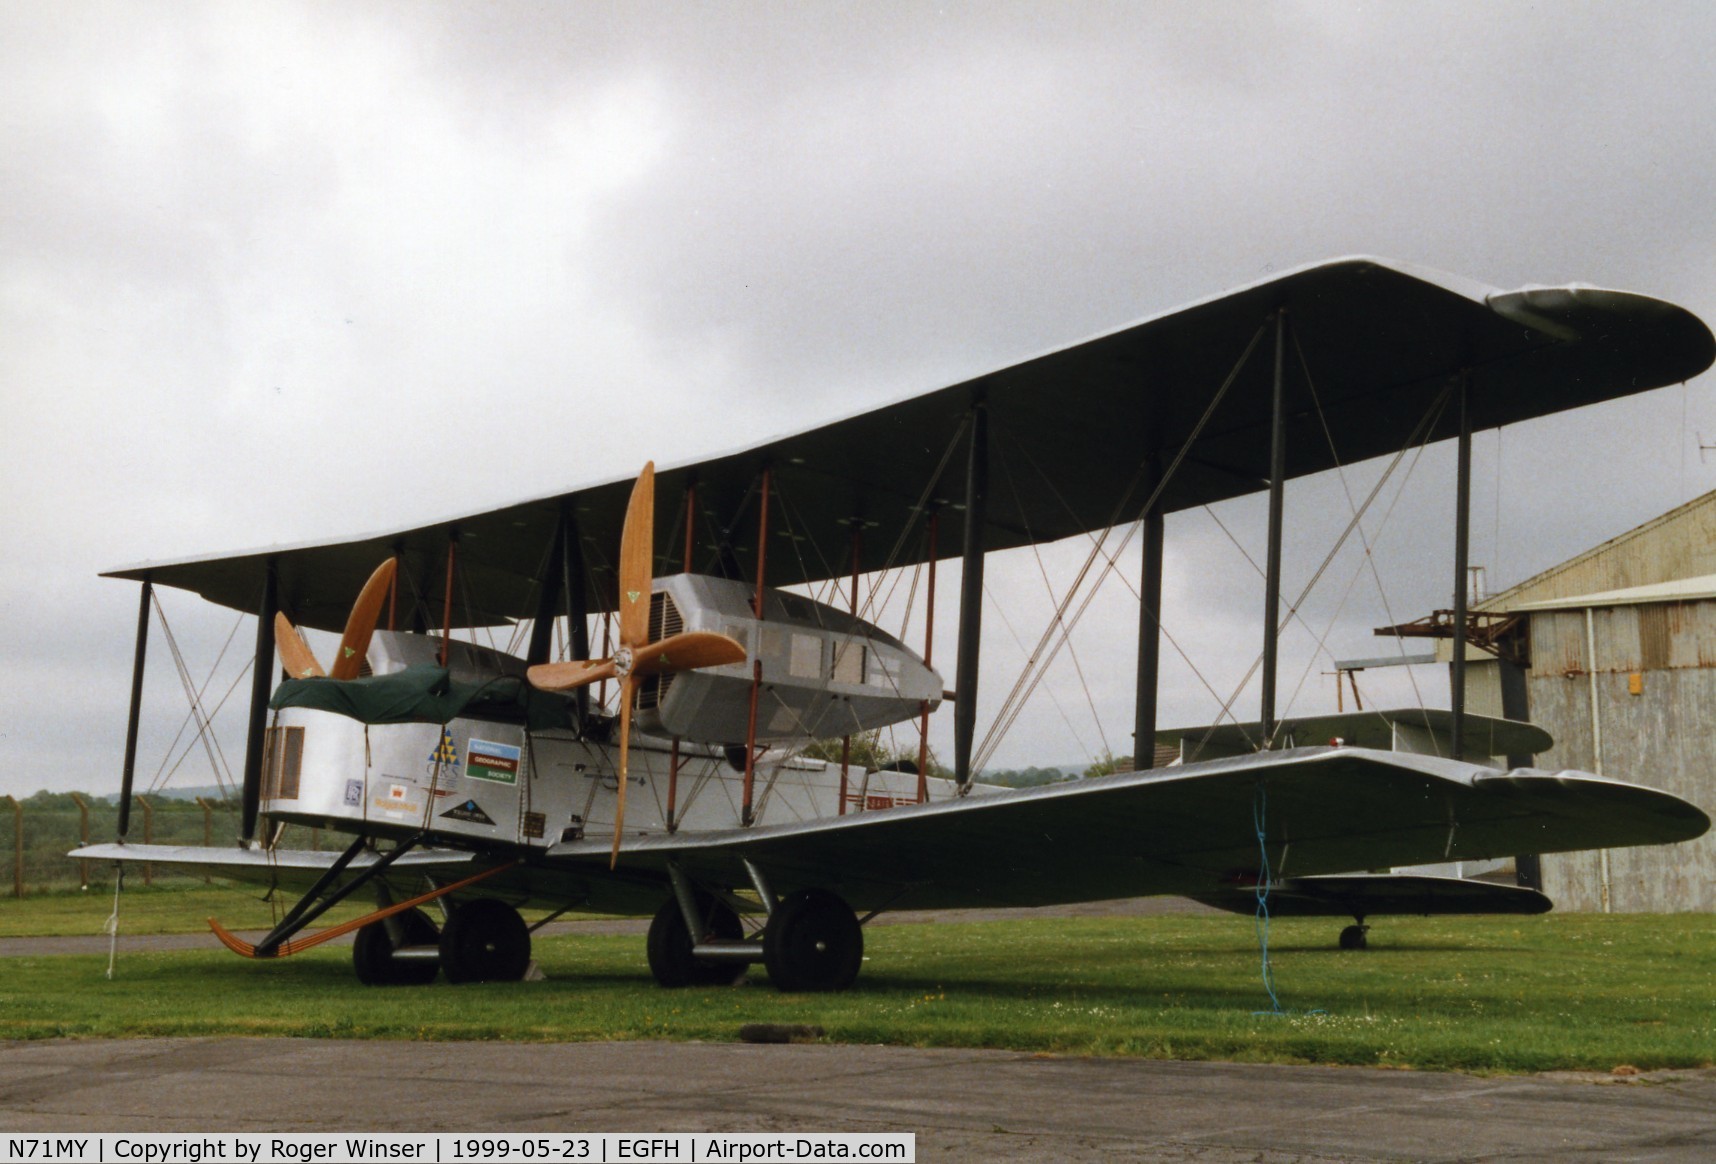 N71MY, 1994 Vickers FB-27A Vimy (replica) C/N 01, Unexpected stop over at Swansea Airport